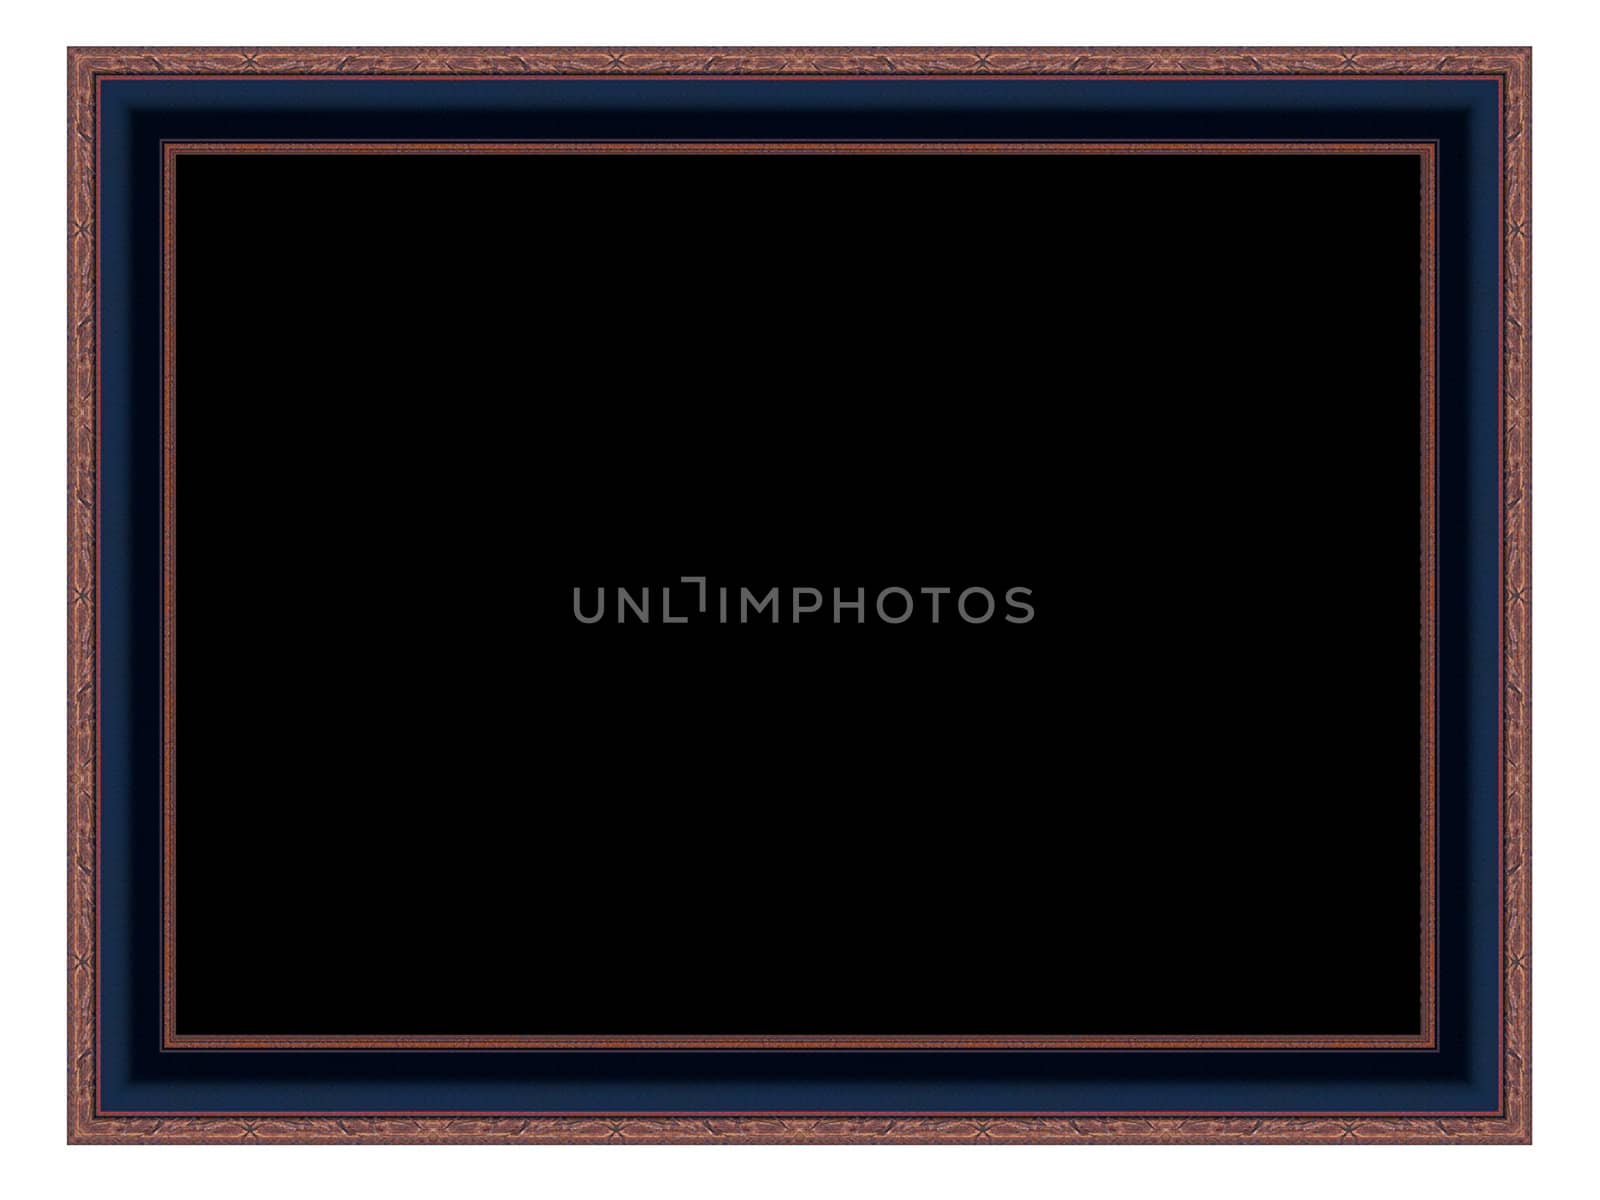 A large wooden frame - dark wood on white background